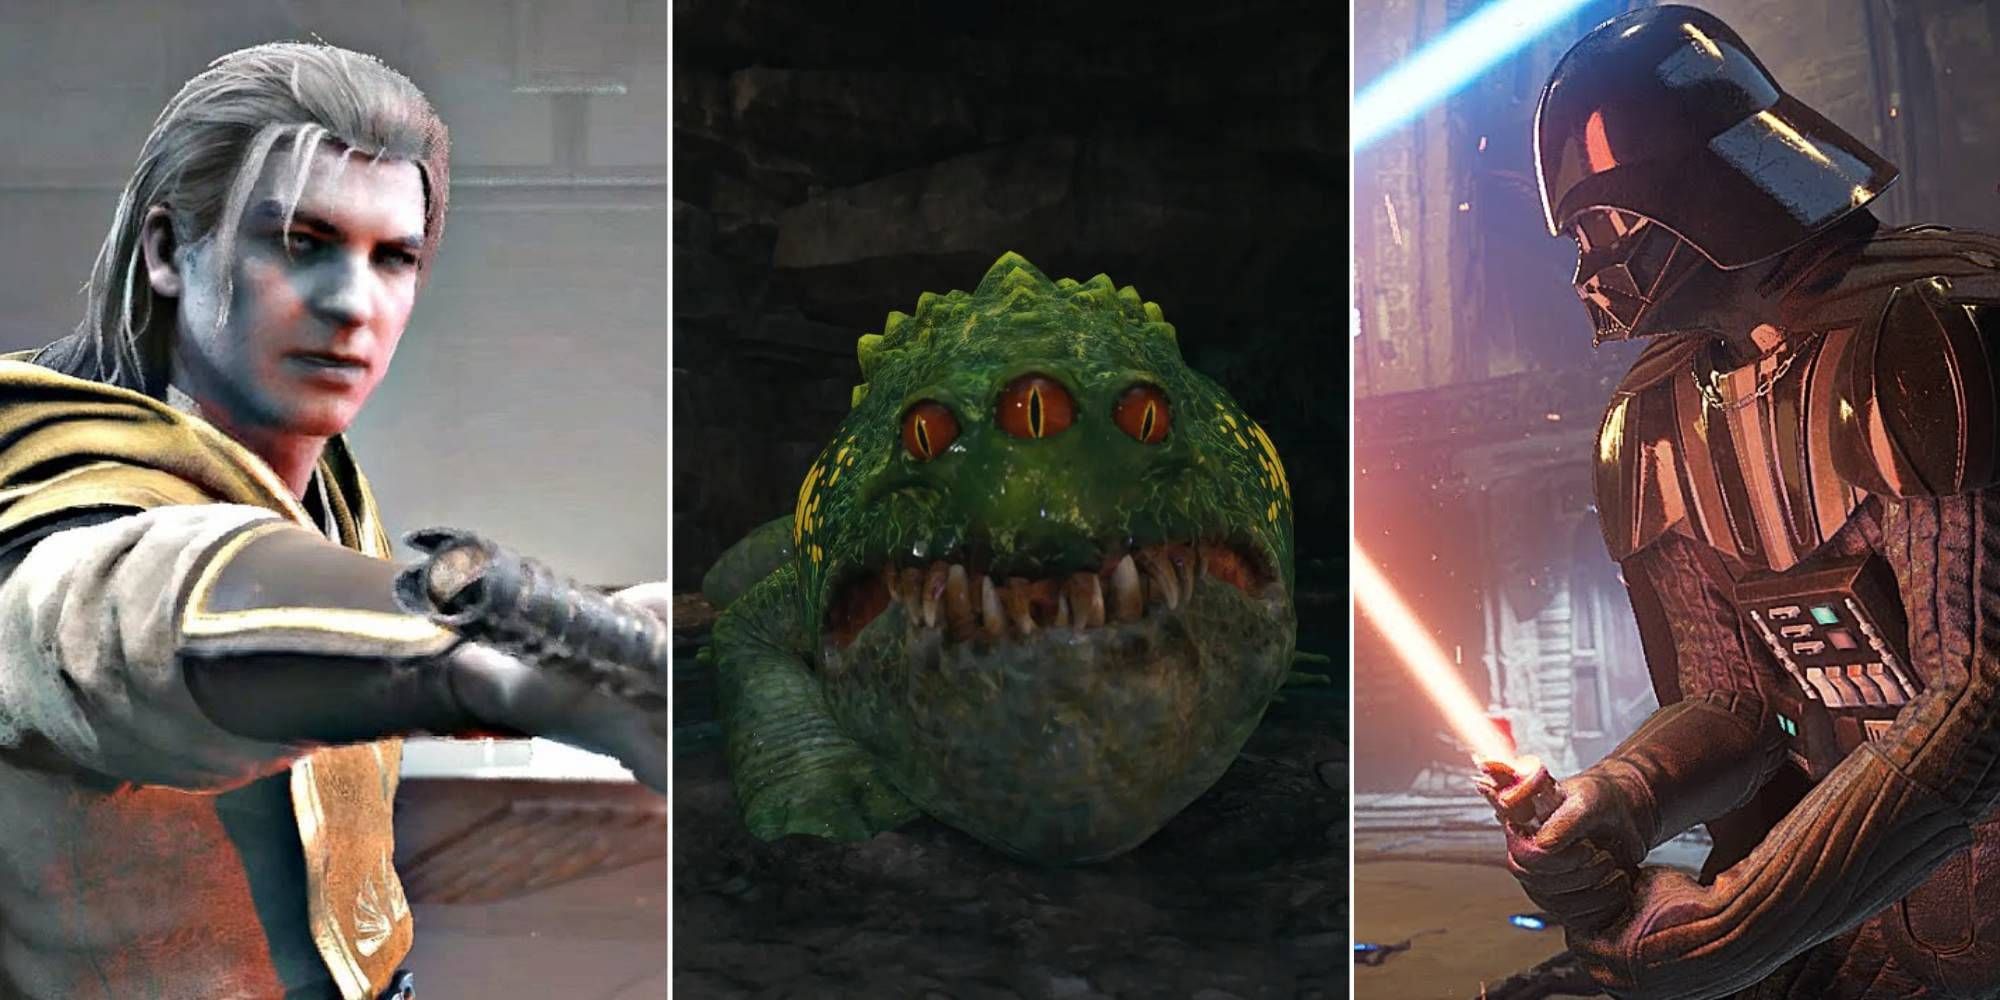 Star Wars Jedi: Fallen Order bosses: every boss in the game and